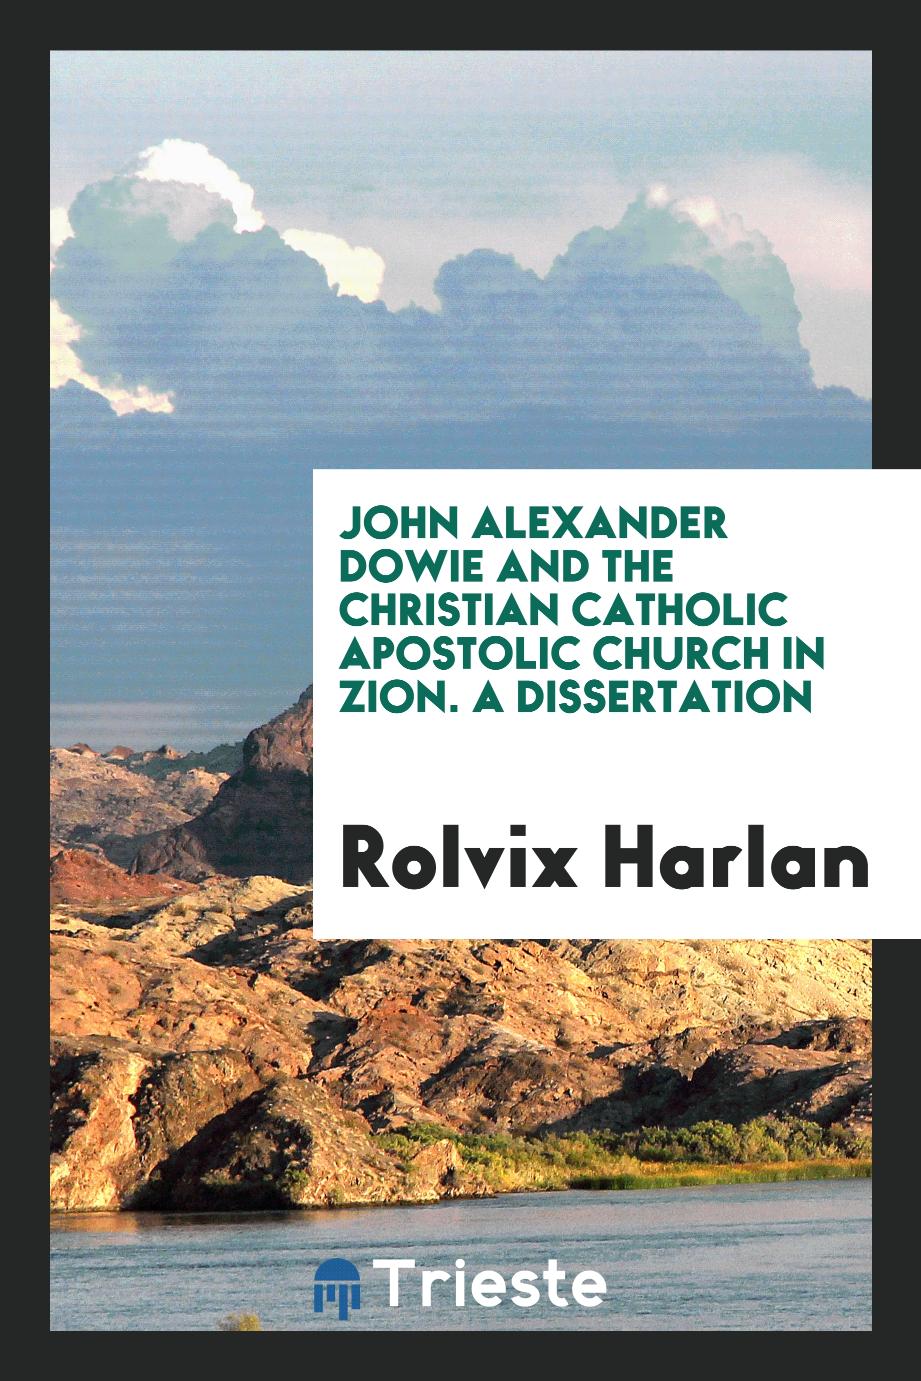 John Alexander Dowie and the Christian Catholic apostolic church in Zion. A dissertation